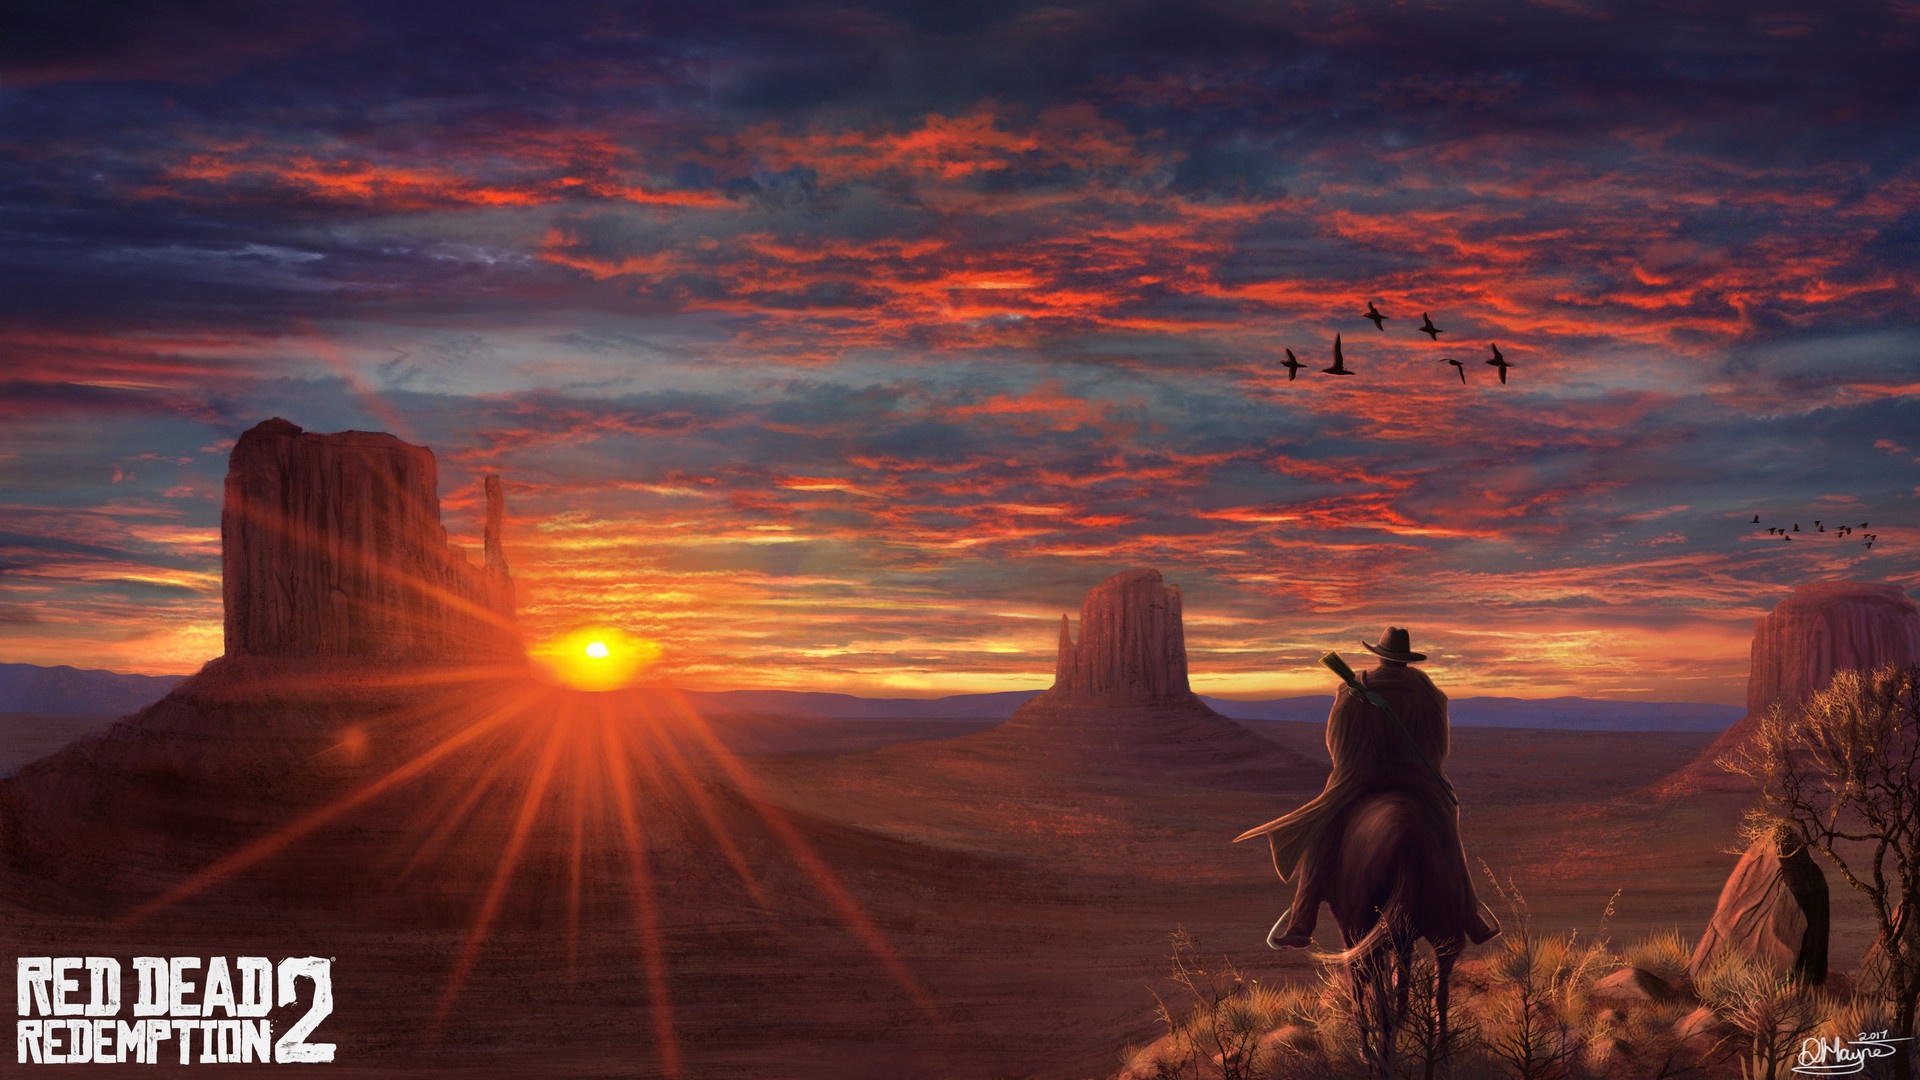 General 1920x1080 video games Red Dead Redemption 2 sunlight sky video game art 2017 (Year)